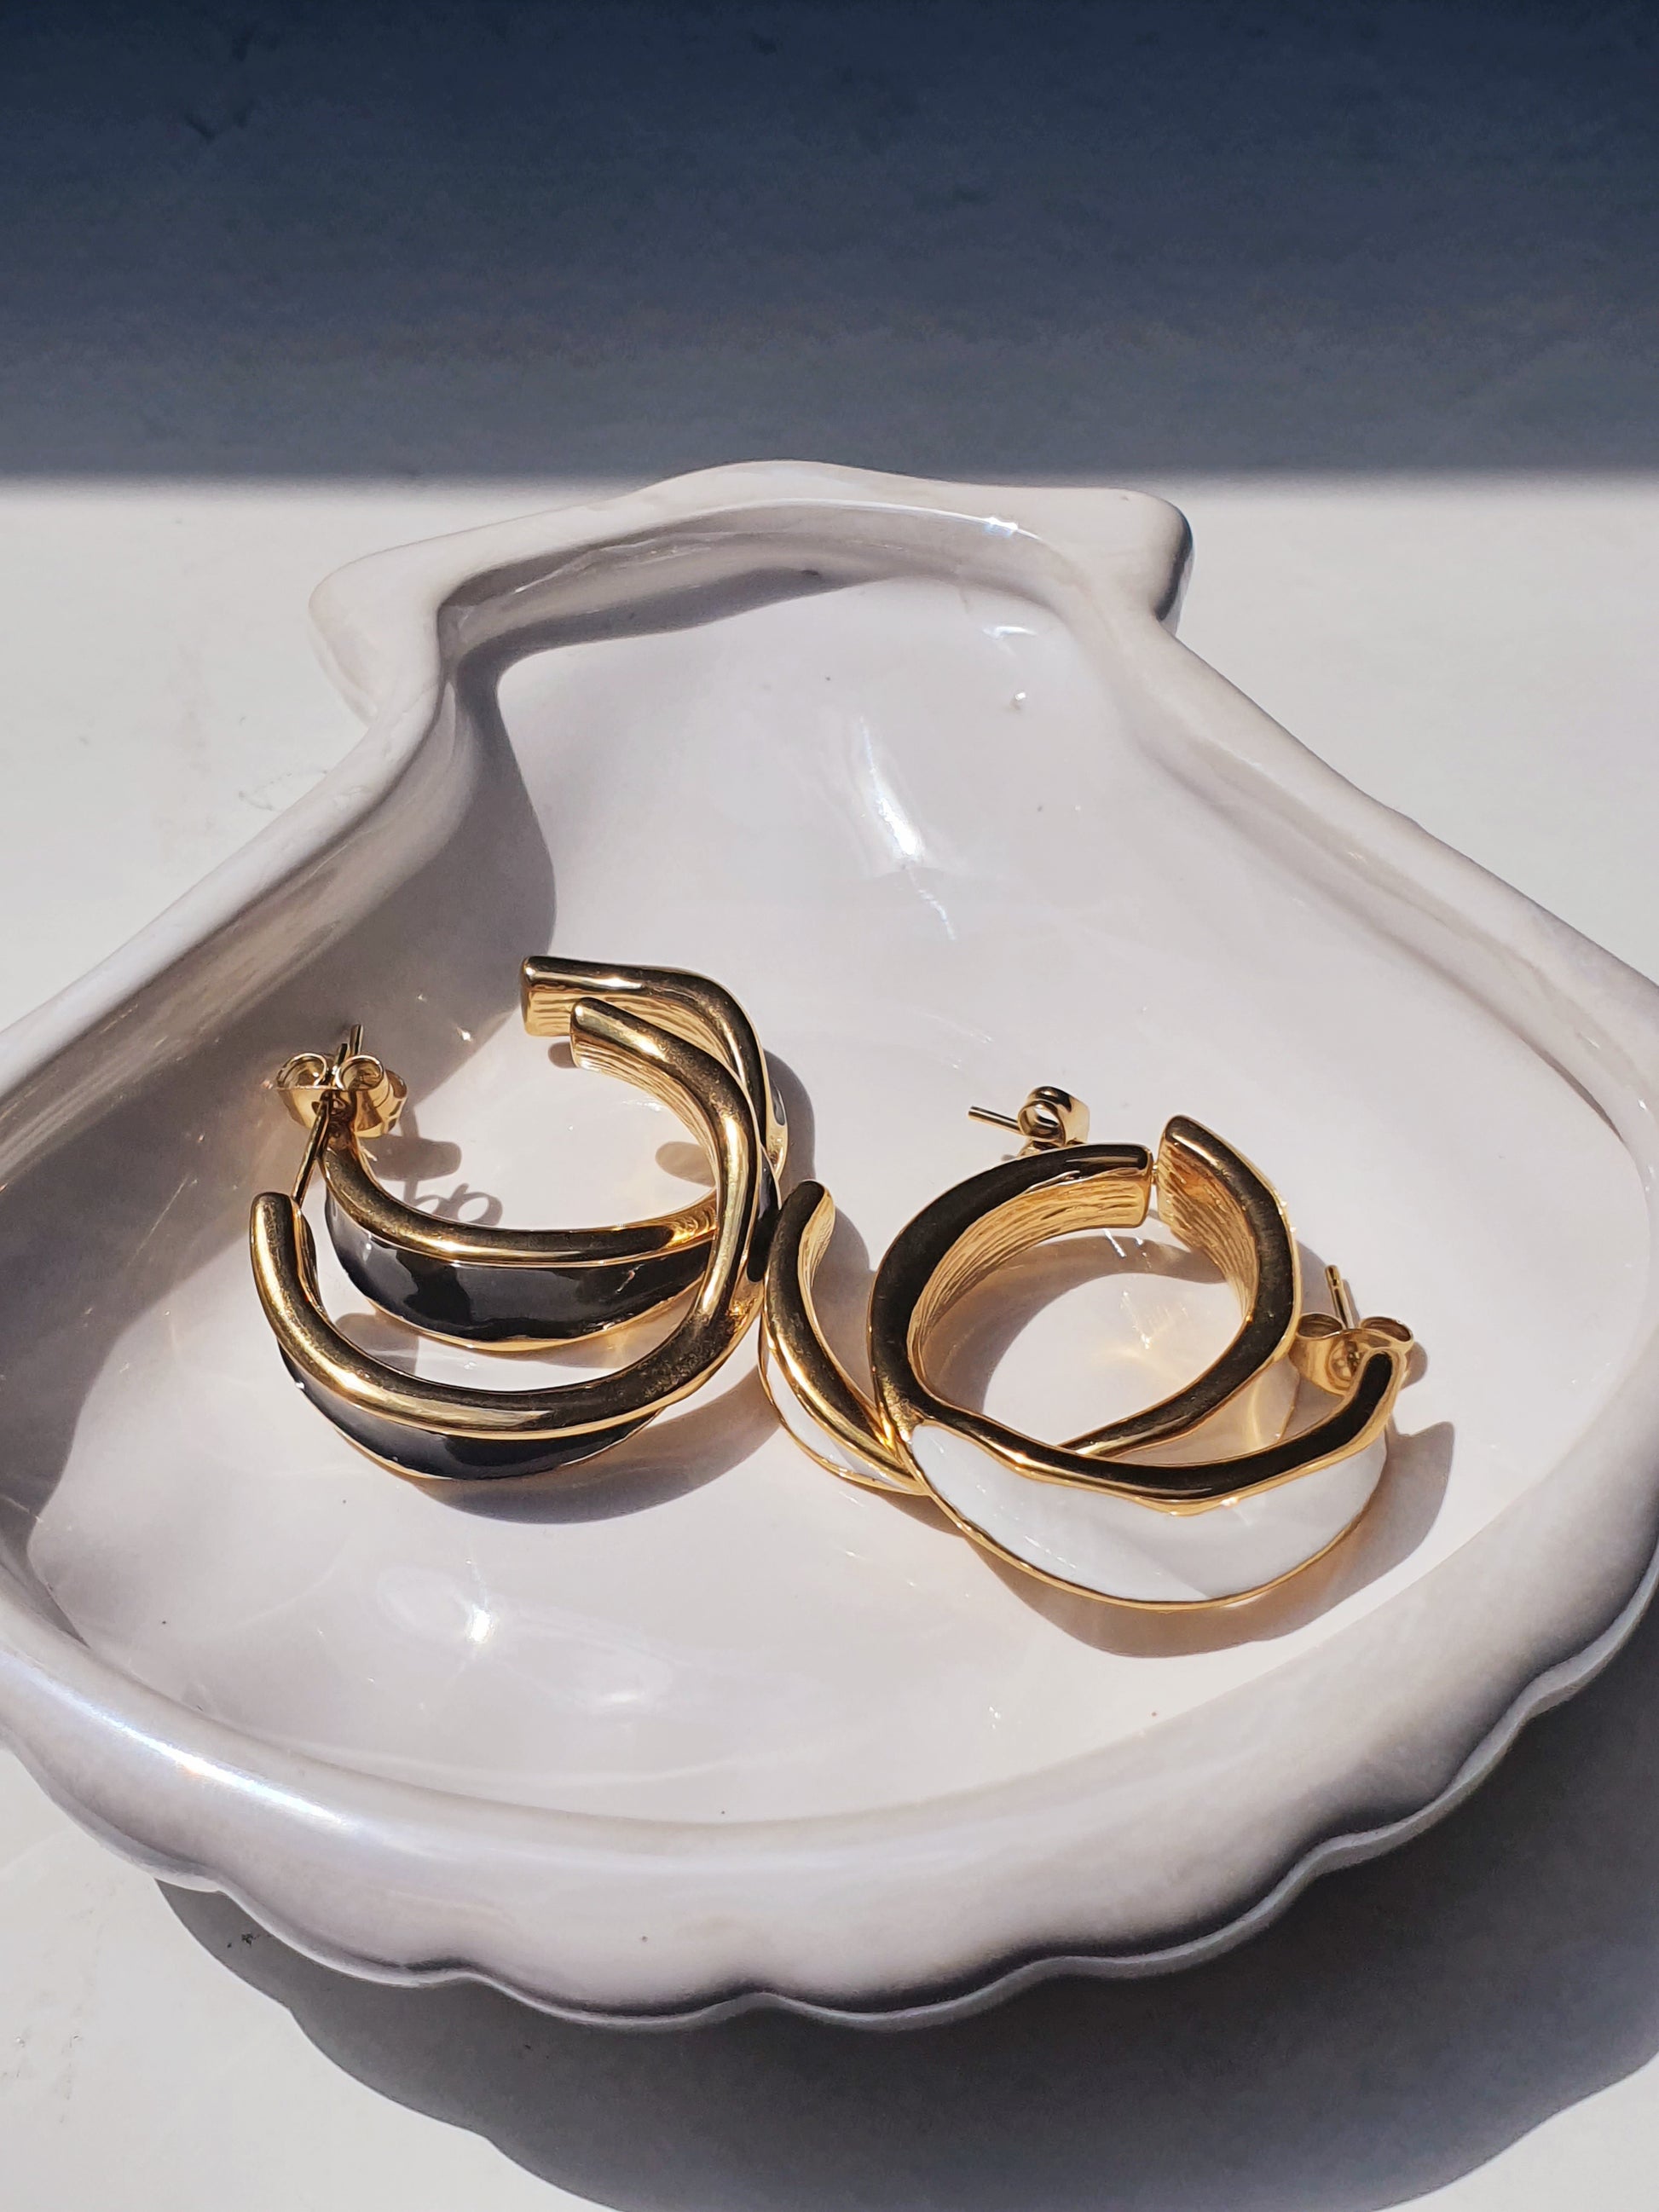 White shell shaped dish holding two pairs of hoops. Both are gold with butterfly stud backs and a twist design. One pair has a white enamel finish and the other pair has a black enamel finish